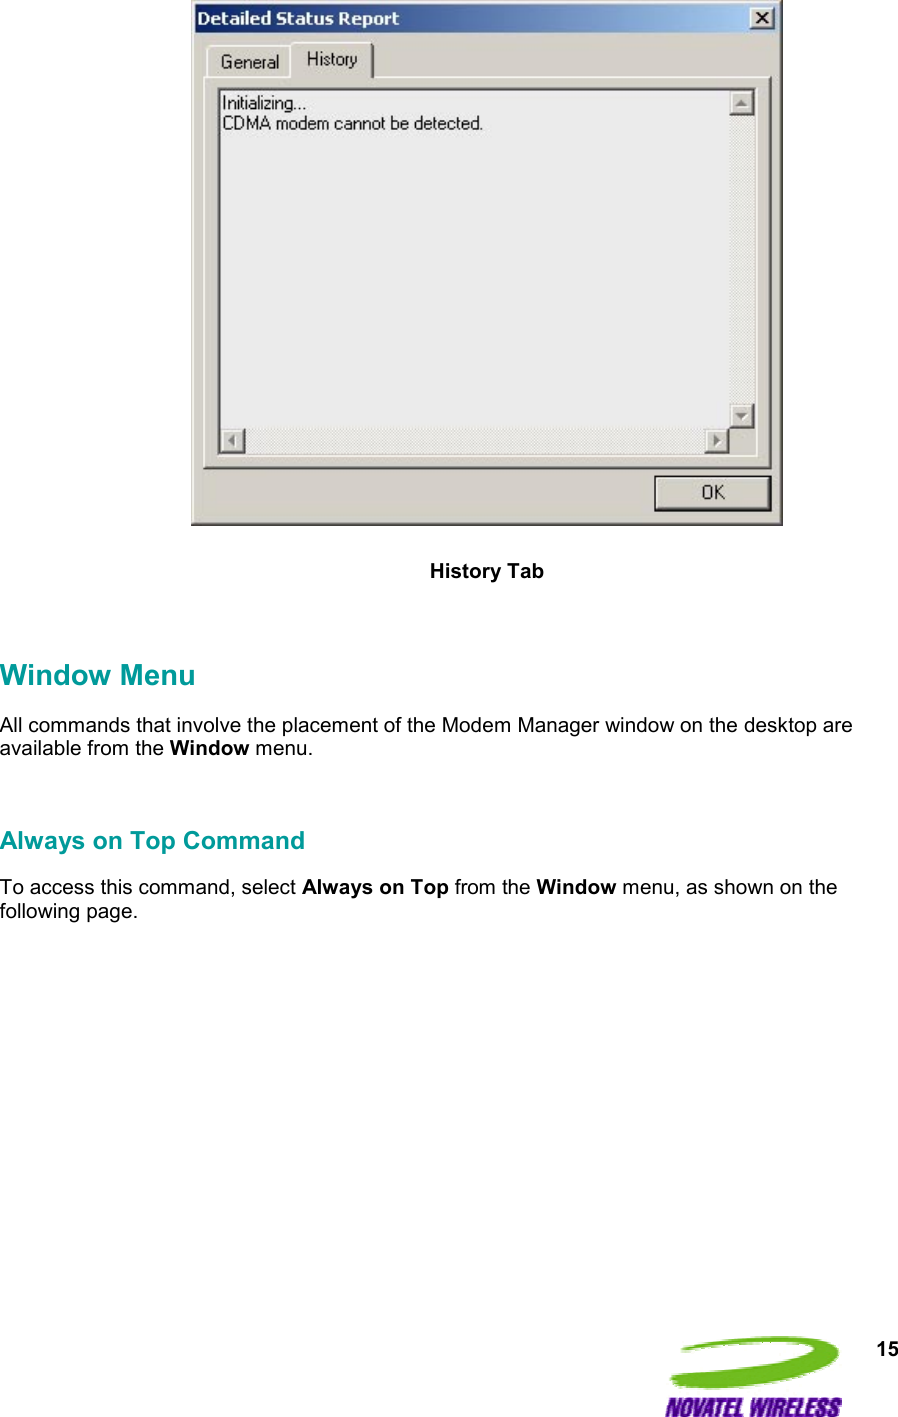  15   History Tab  Window Menu All commands that involve the placement of the Modem Manager window on the desktop are available from the Window menu.  Always on Top Command To access this command, select Always on Top from the Window menu, as shown on the following page.  